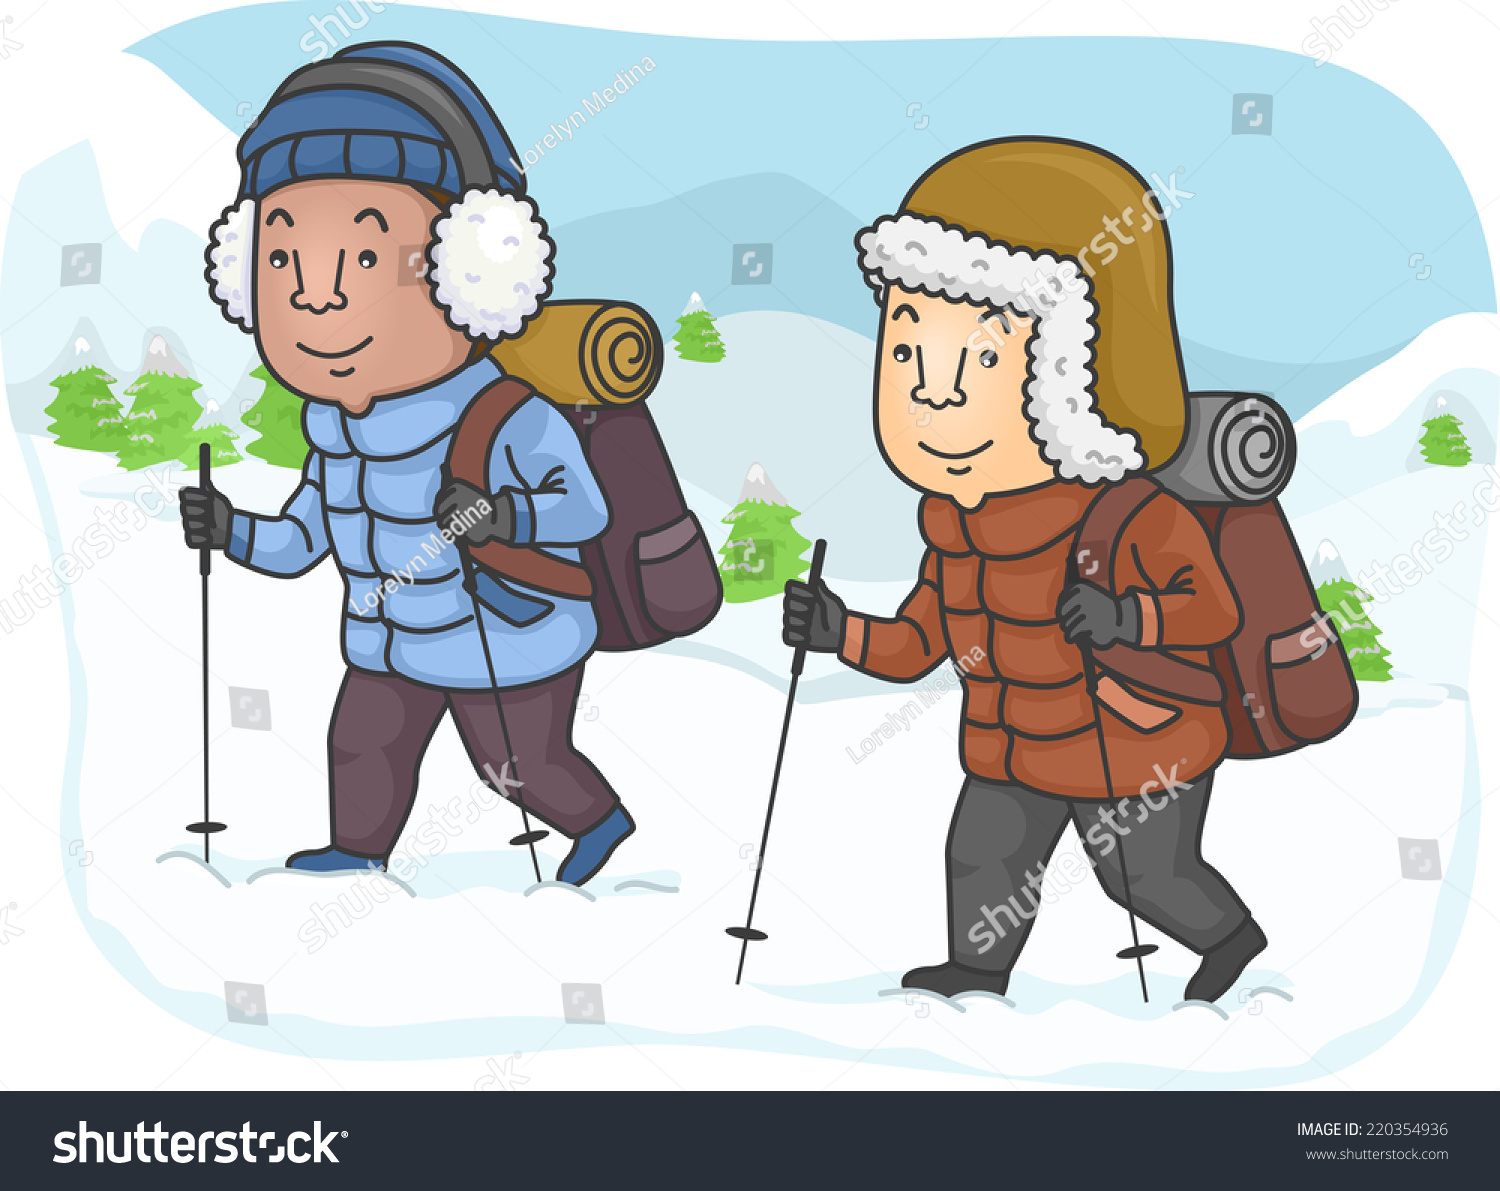 Illustration Featuring Men Hiking In A Snowy Mountain - 220354936 ...